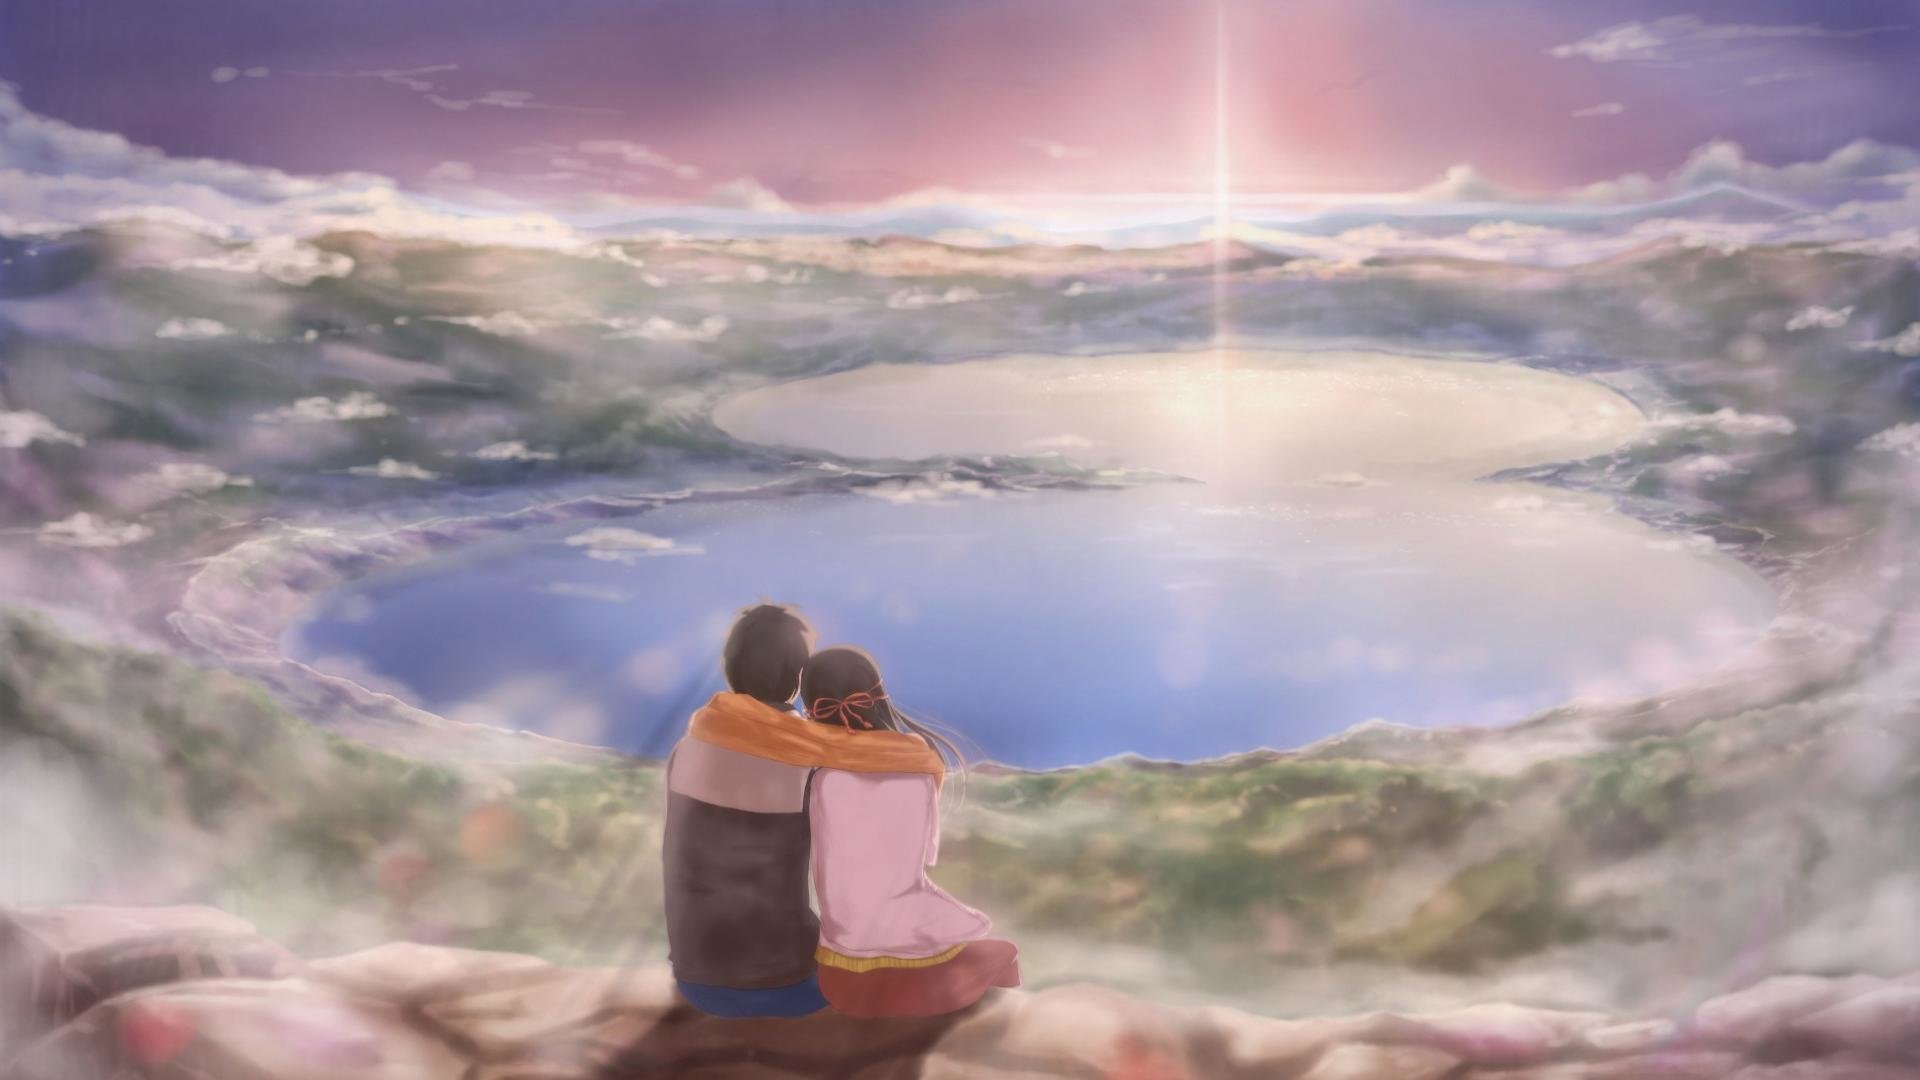 Awesome Your Name free wallpaper ID:148576 for hd 1080p computer